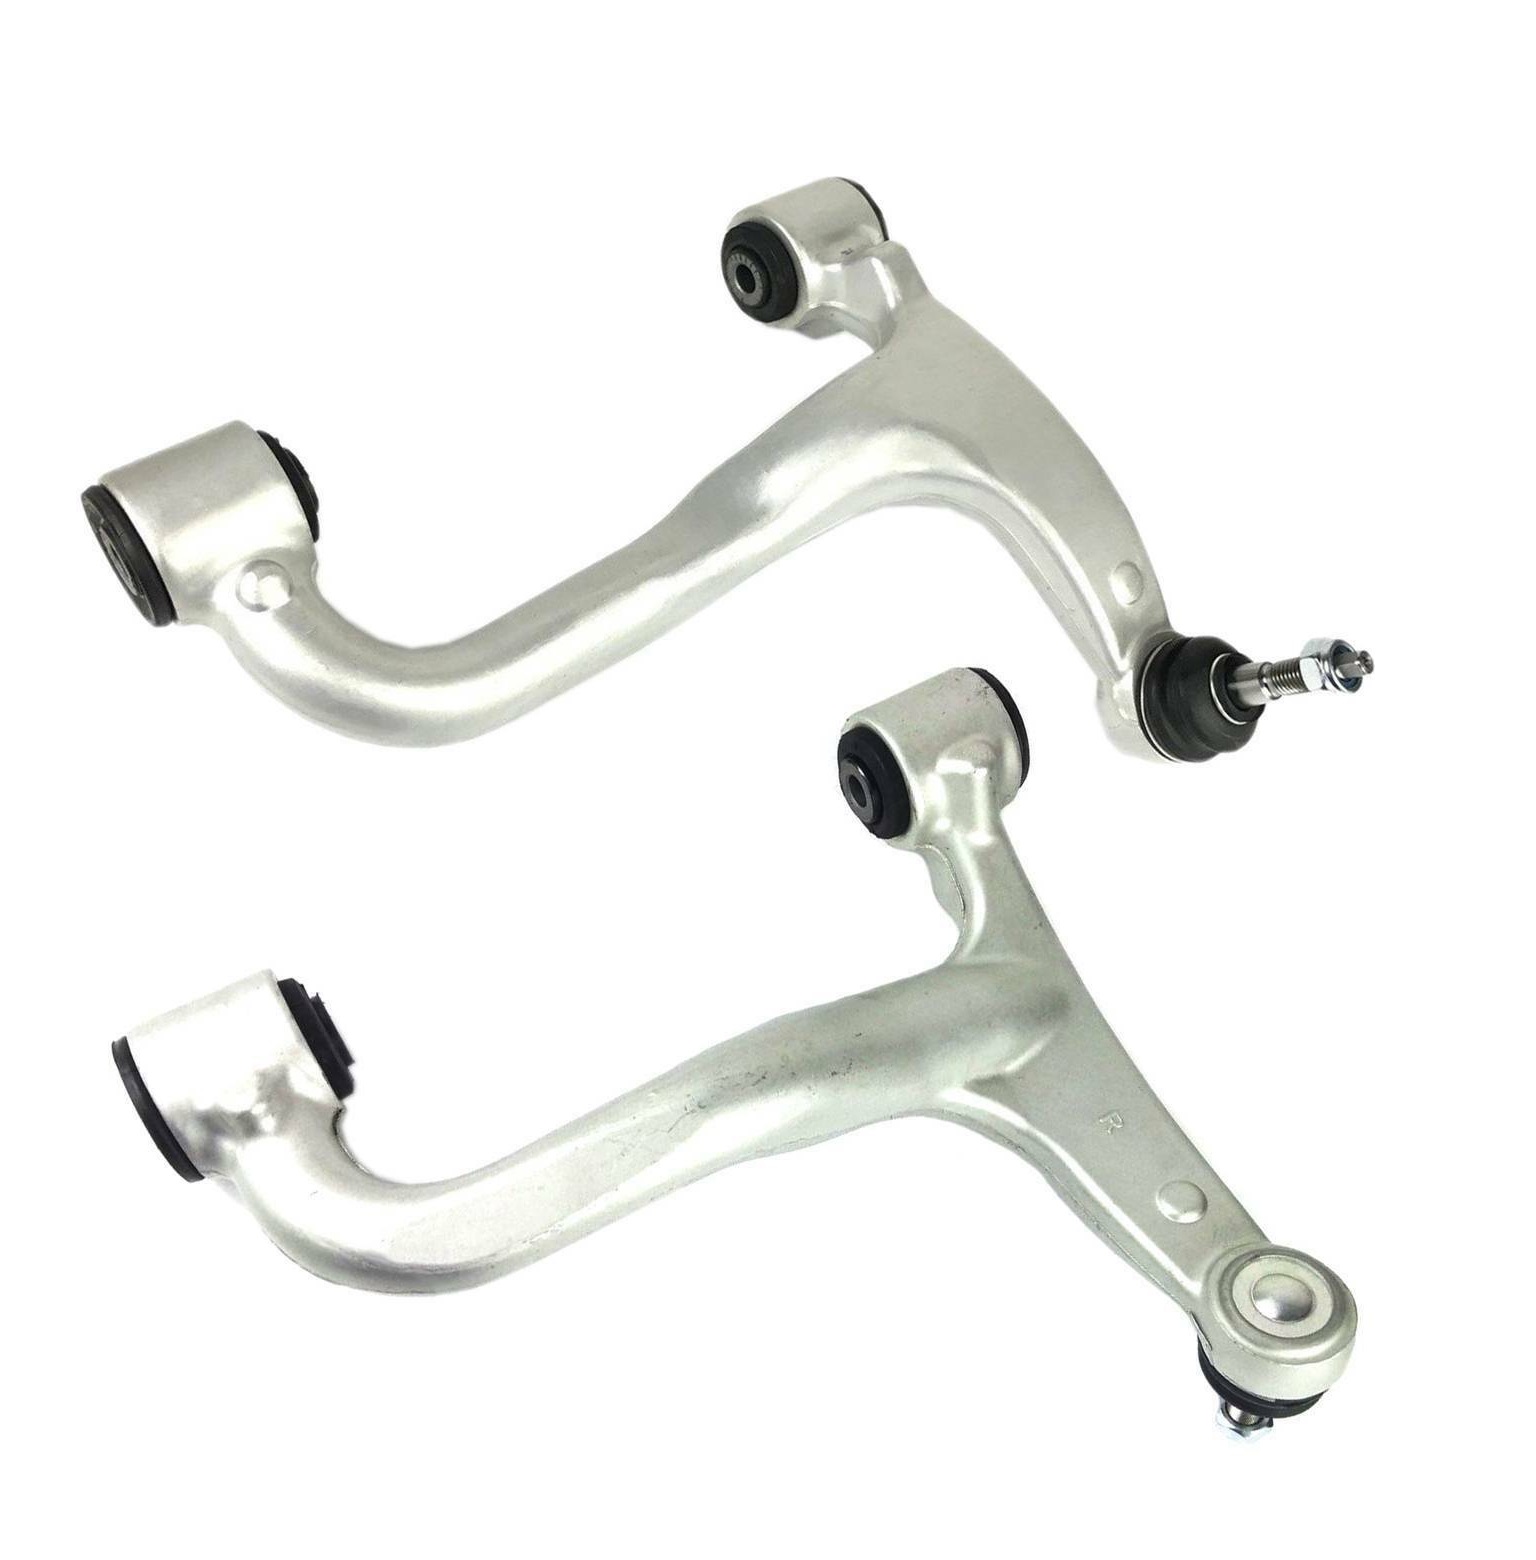 2 x Upper Control Arms Front for Mercedes W163 ML270 ML350 ML500 ML55 AMG German Made